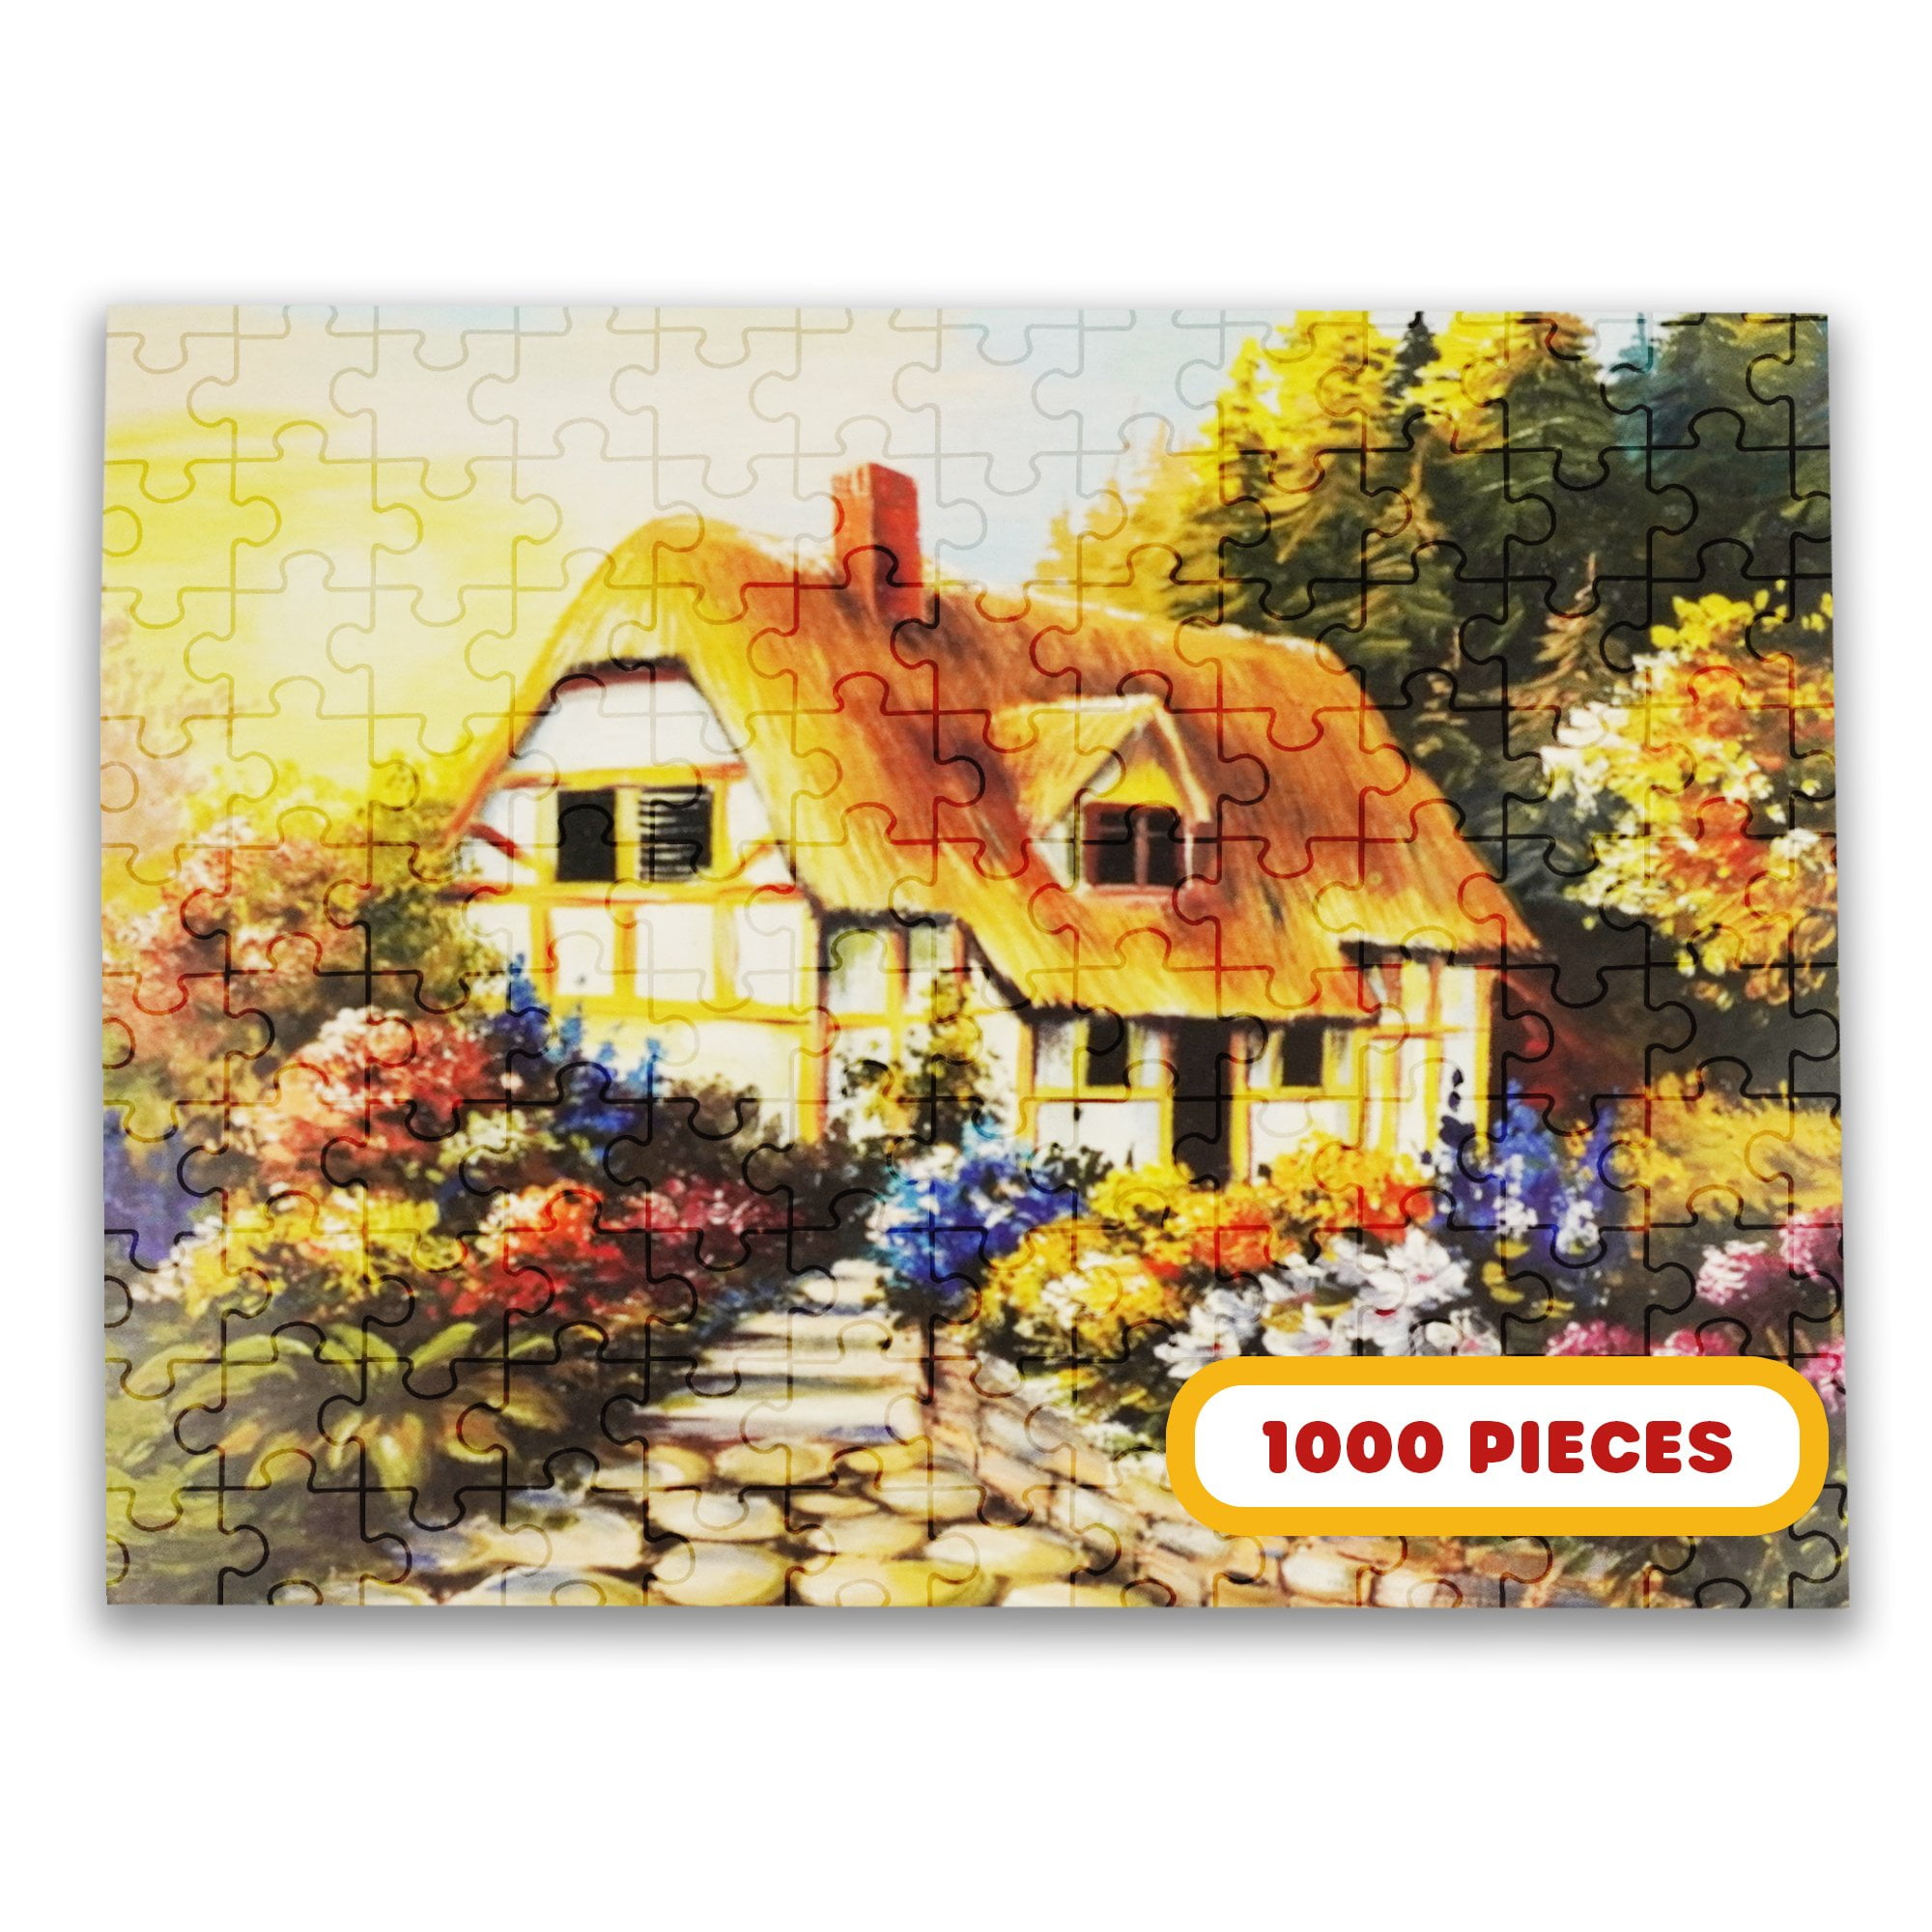 King Delicious Treats Collage Collection 1000 Piece Jigsaw Puzzle 